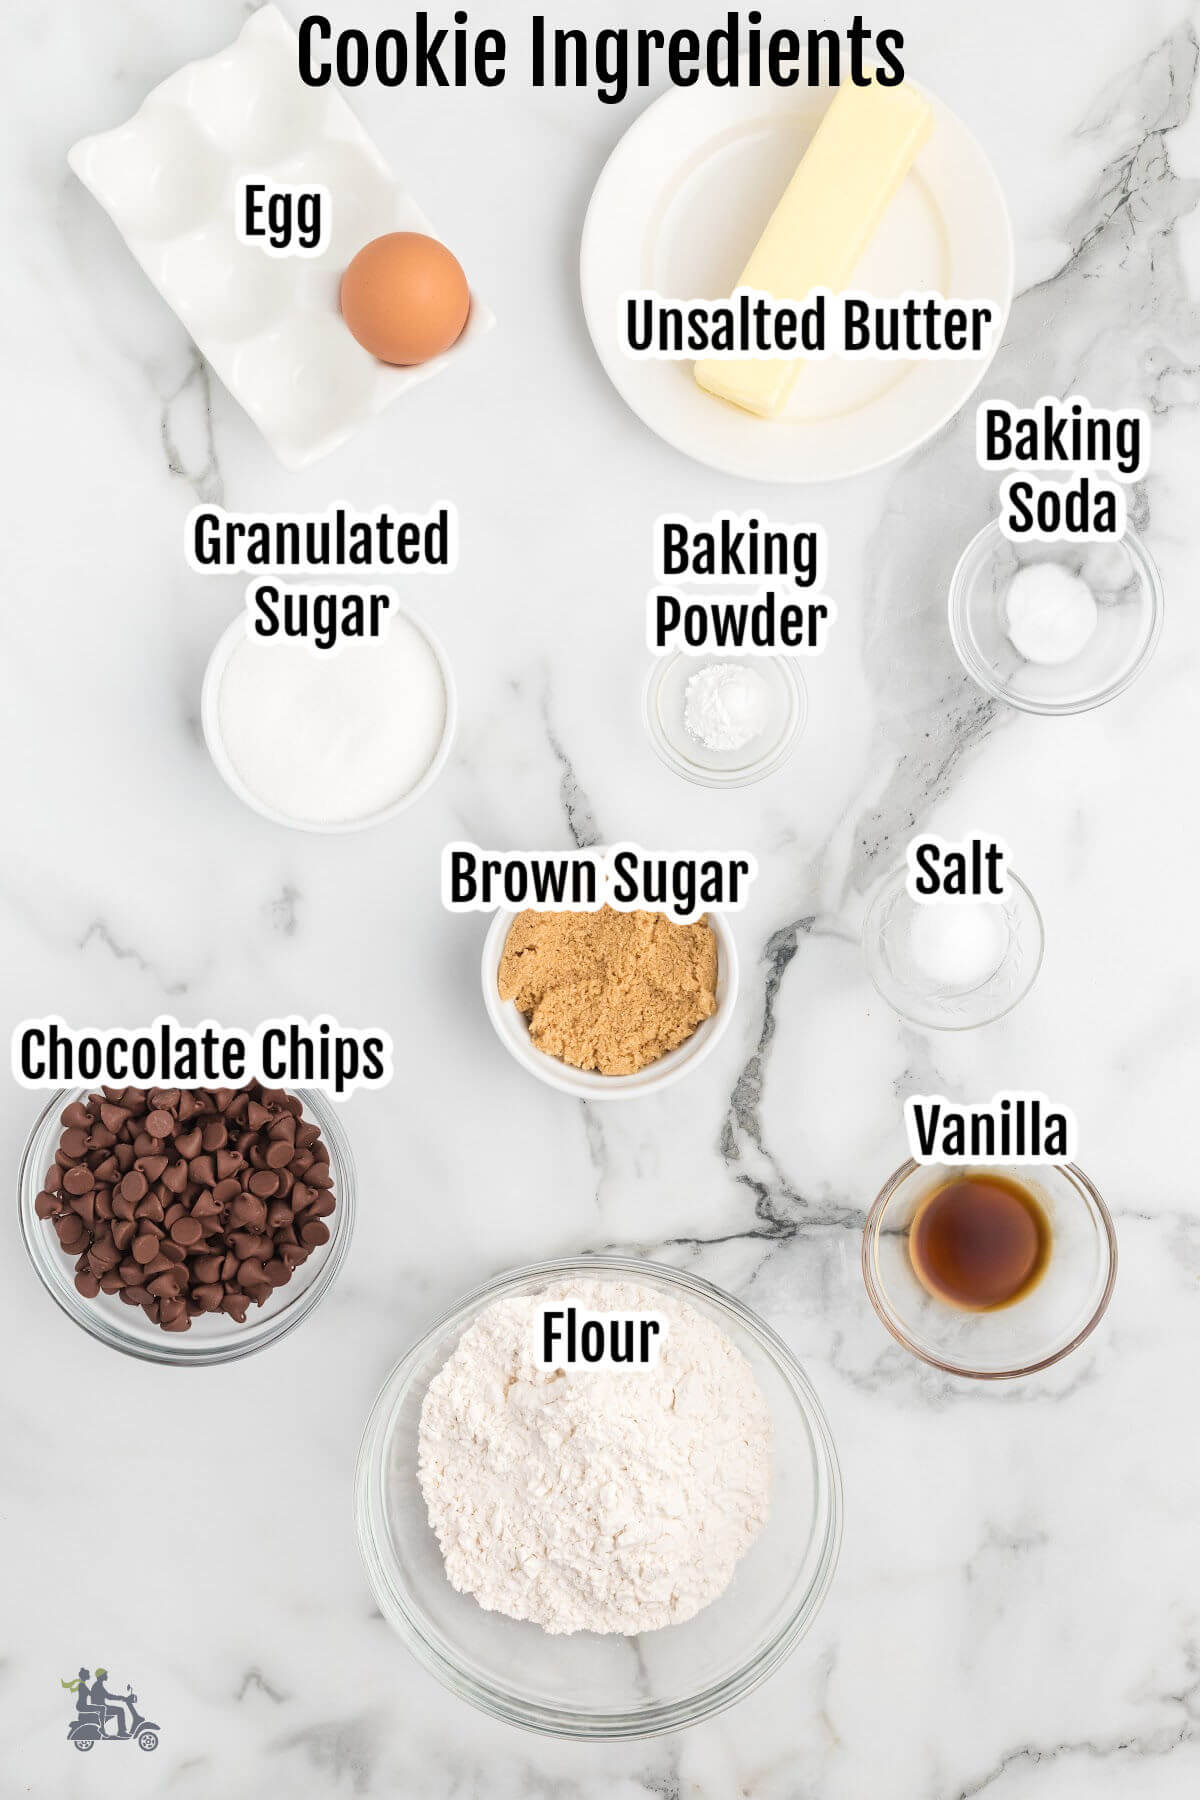 Image of the ingredients necessary for making the chocolate chip cookie portion of the brookies. 